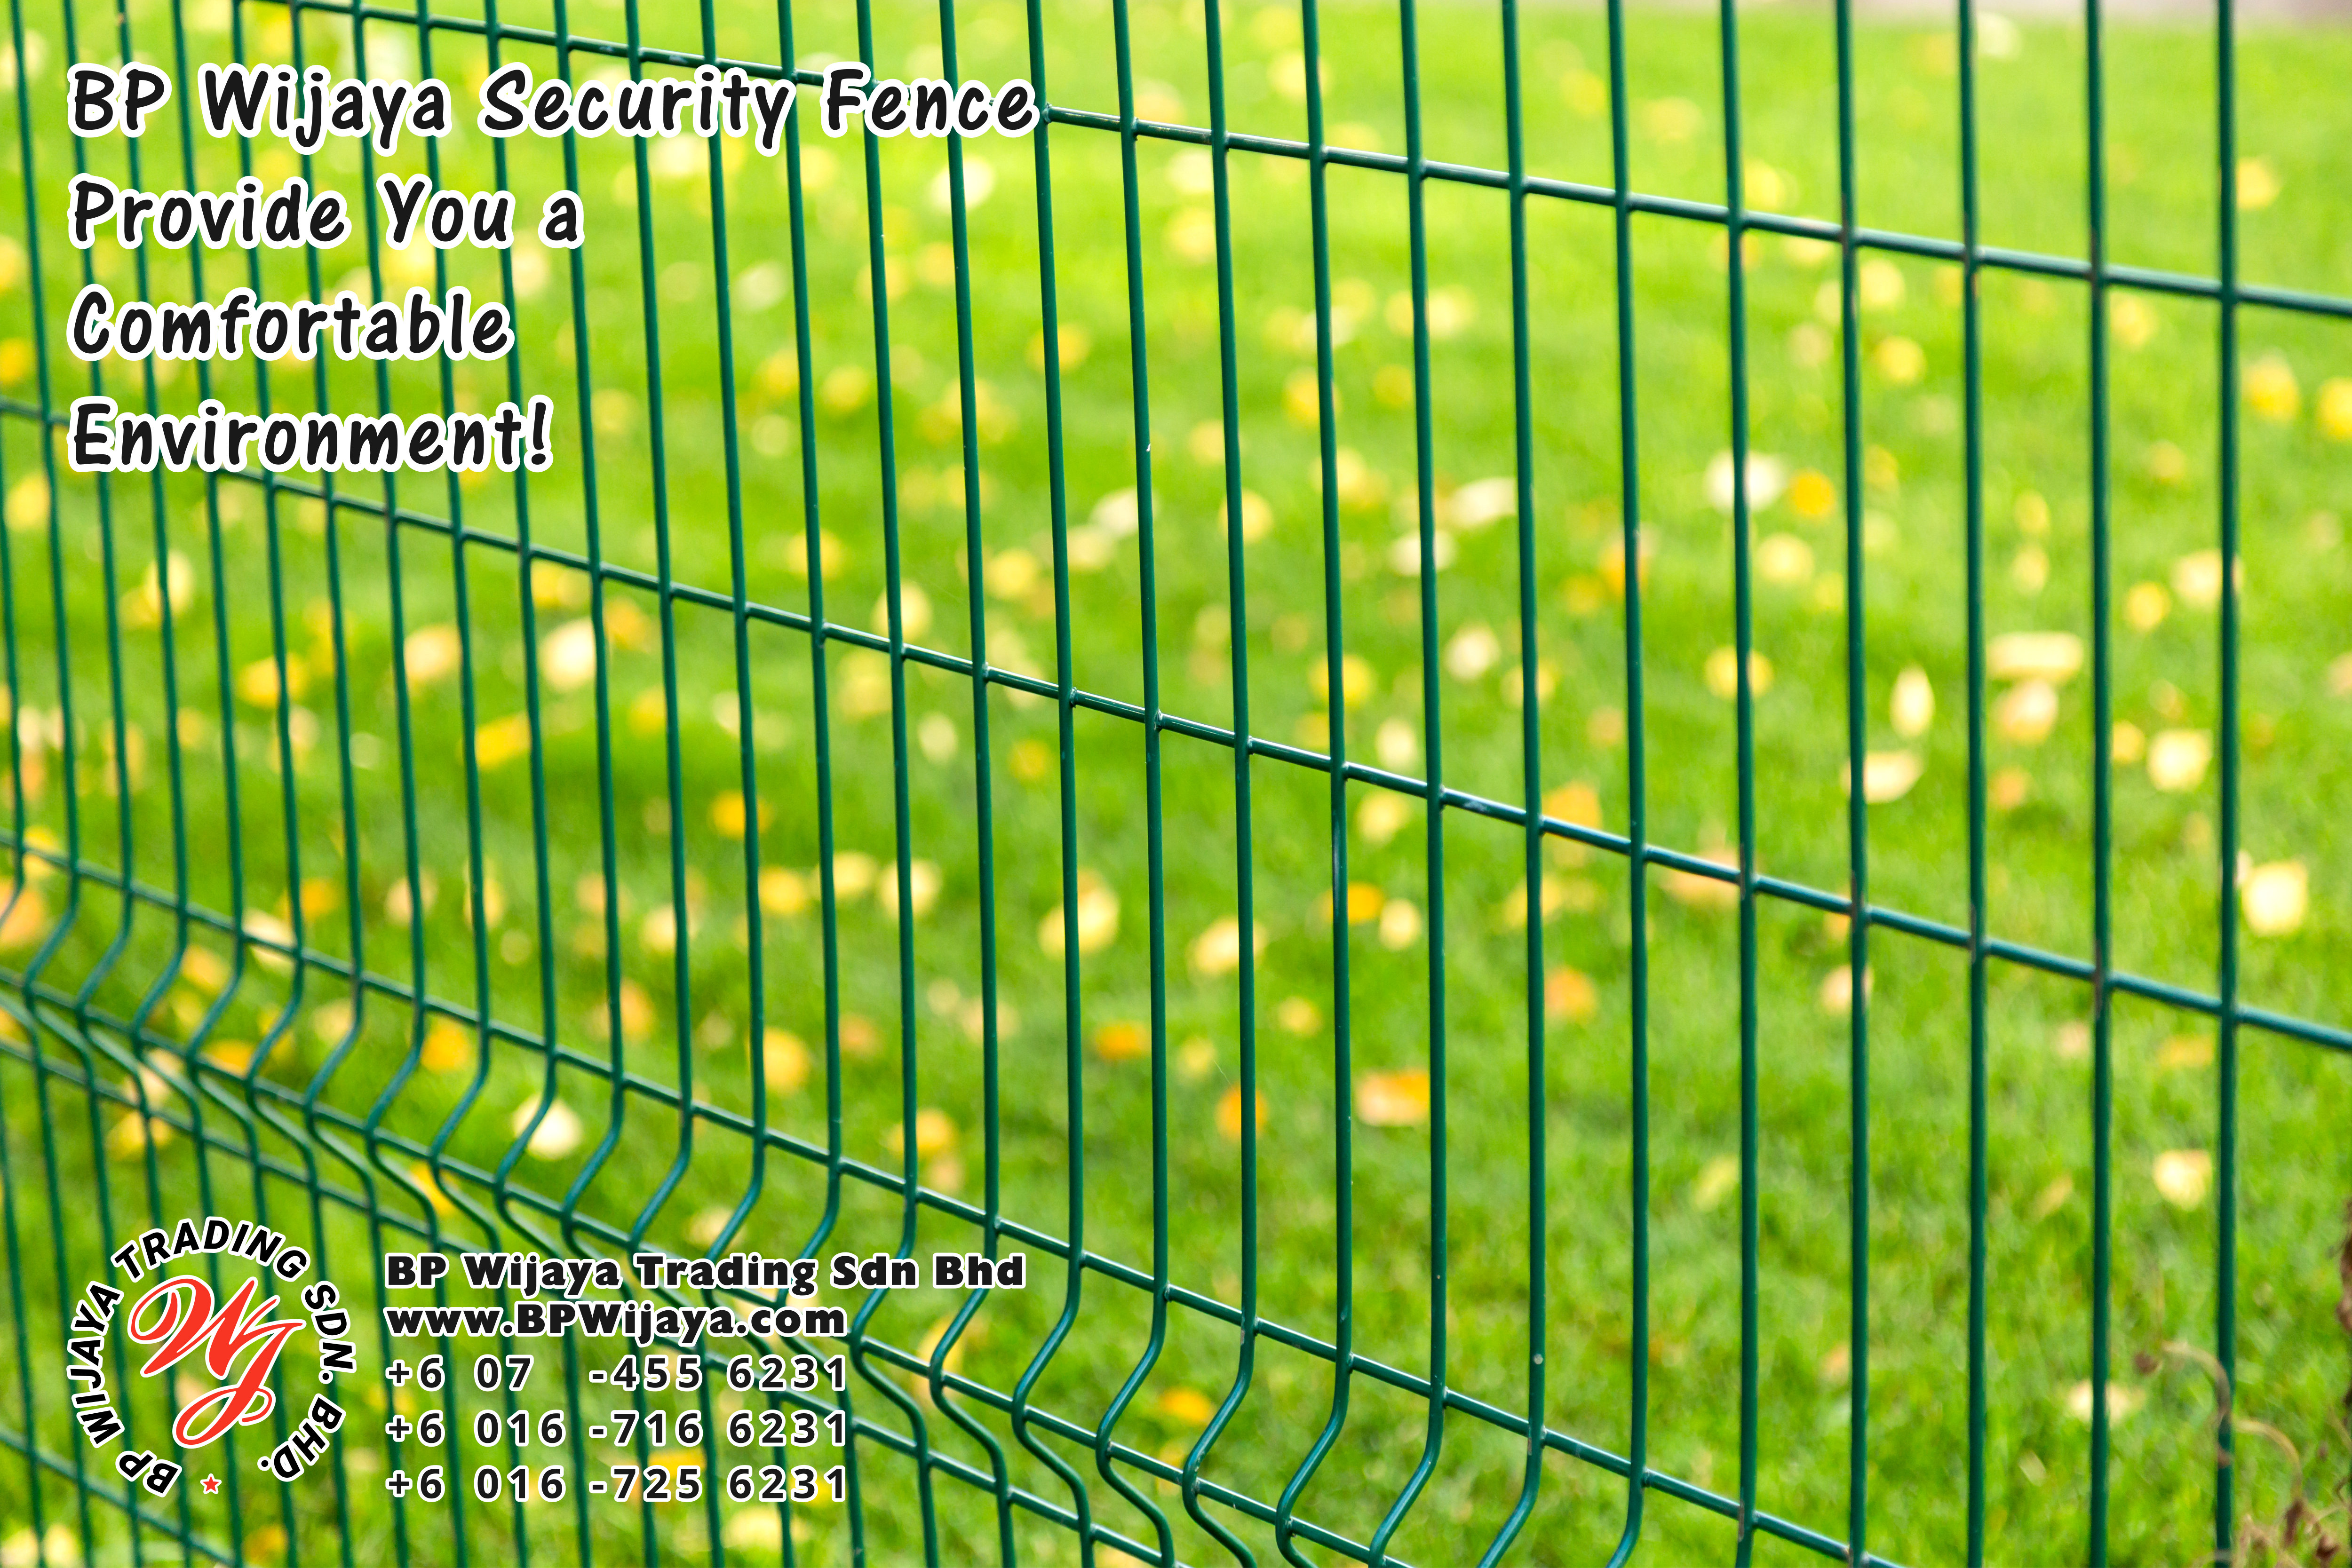 BP Wijaya Trading Sdn Bhd Malaysia Selangor Kuala Lumpur Manufacturer of Safety Fences Building Materials for Housing Construction Site Security Fencing Factory Security Home Security C01-60